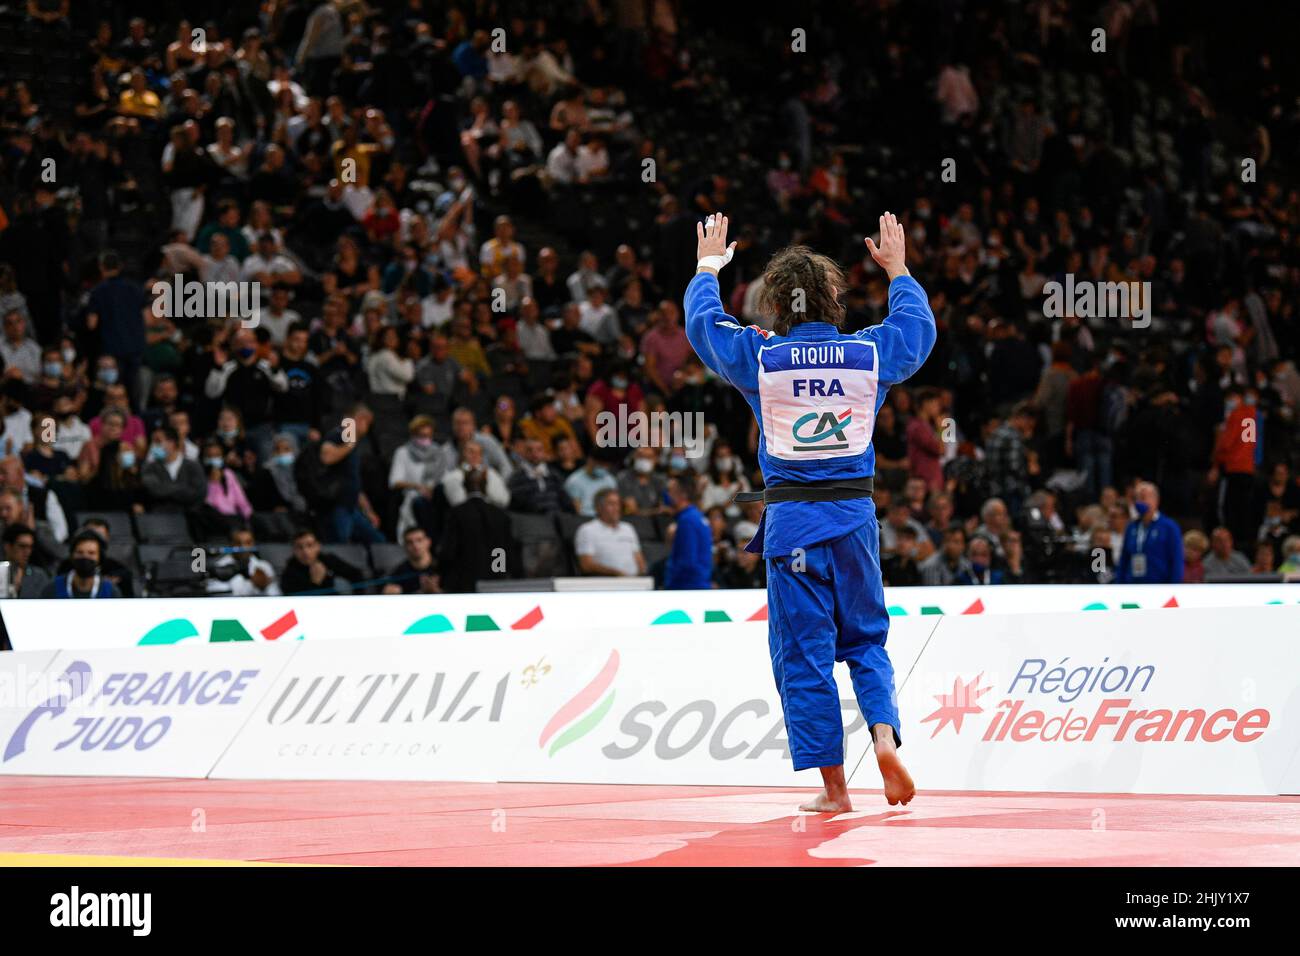 Men -73 kg, Theo RIQUIN of France Silver medal competes and celebrates during the Paris Grand Slam 2021, Judo event on October 16, 2021 at AccorHotels Stock Photo